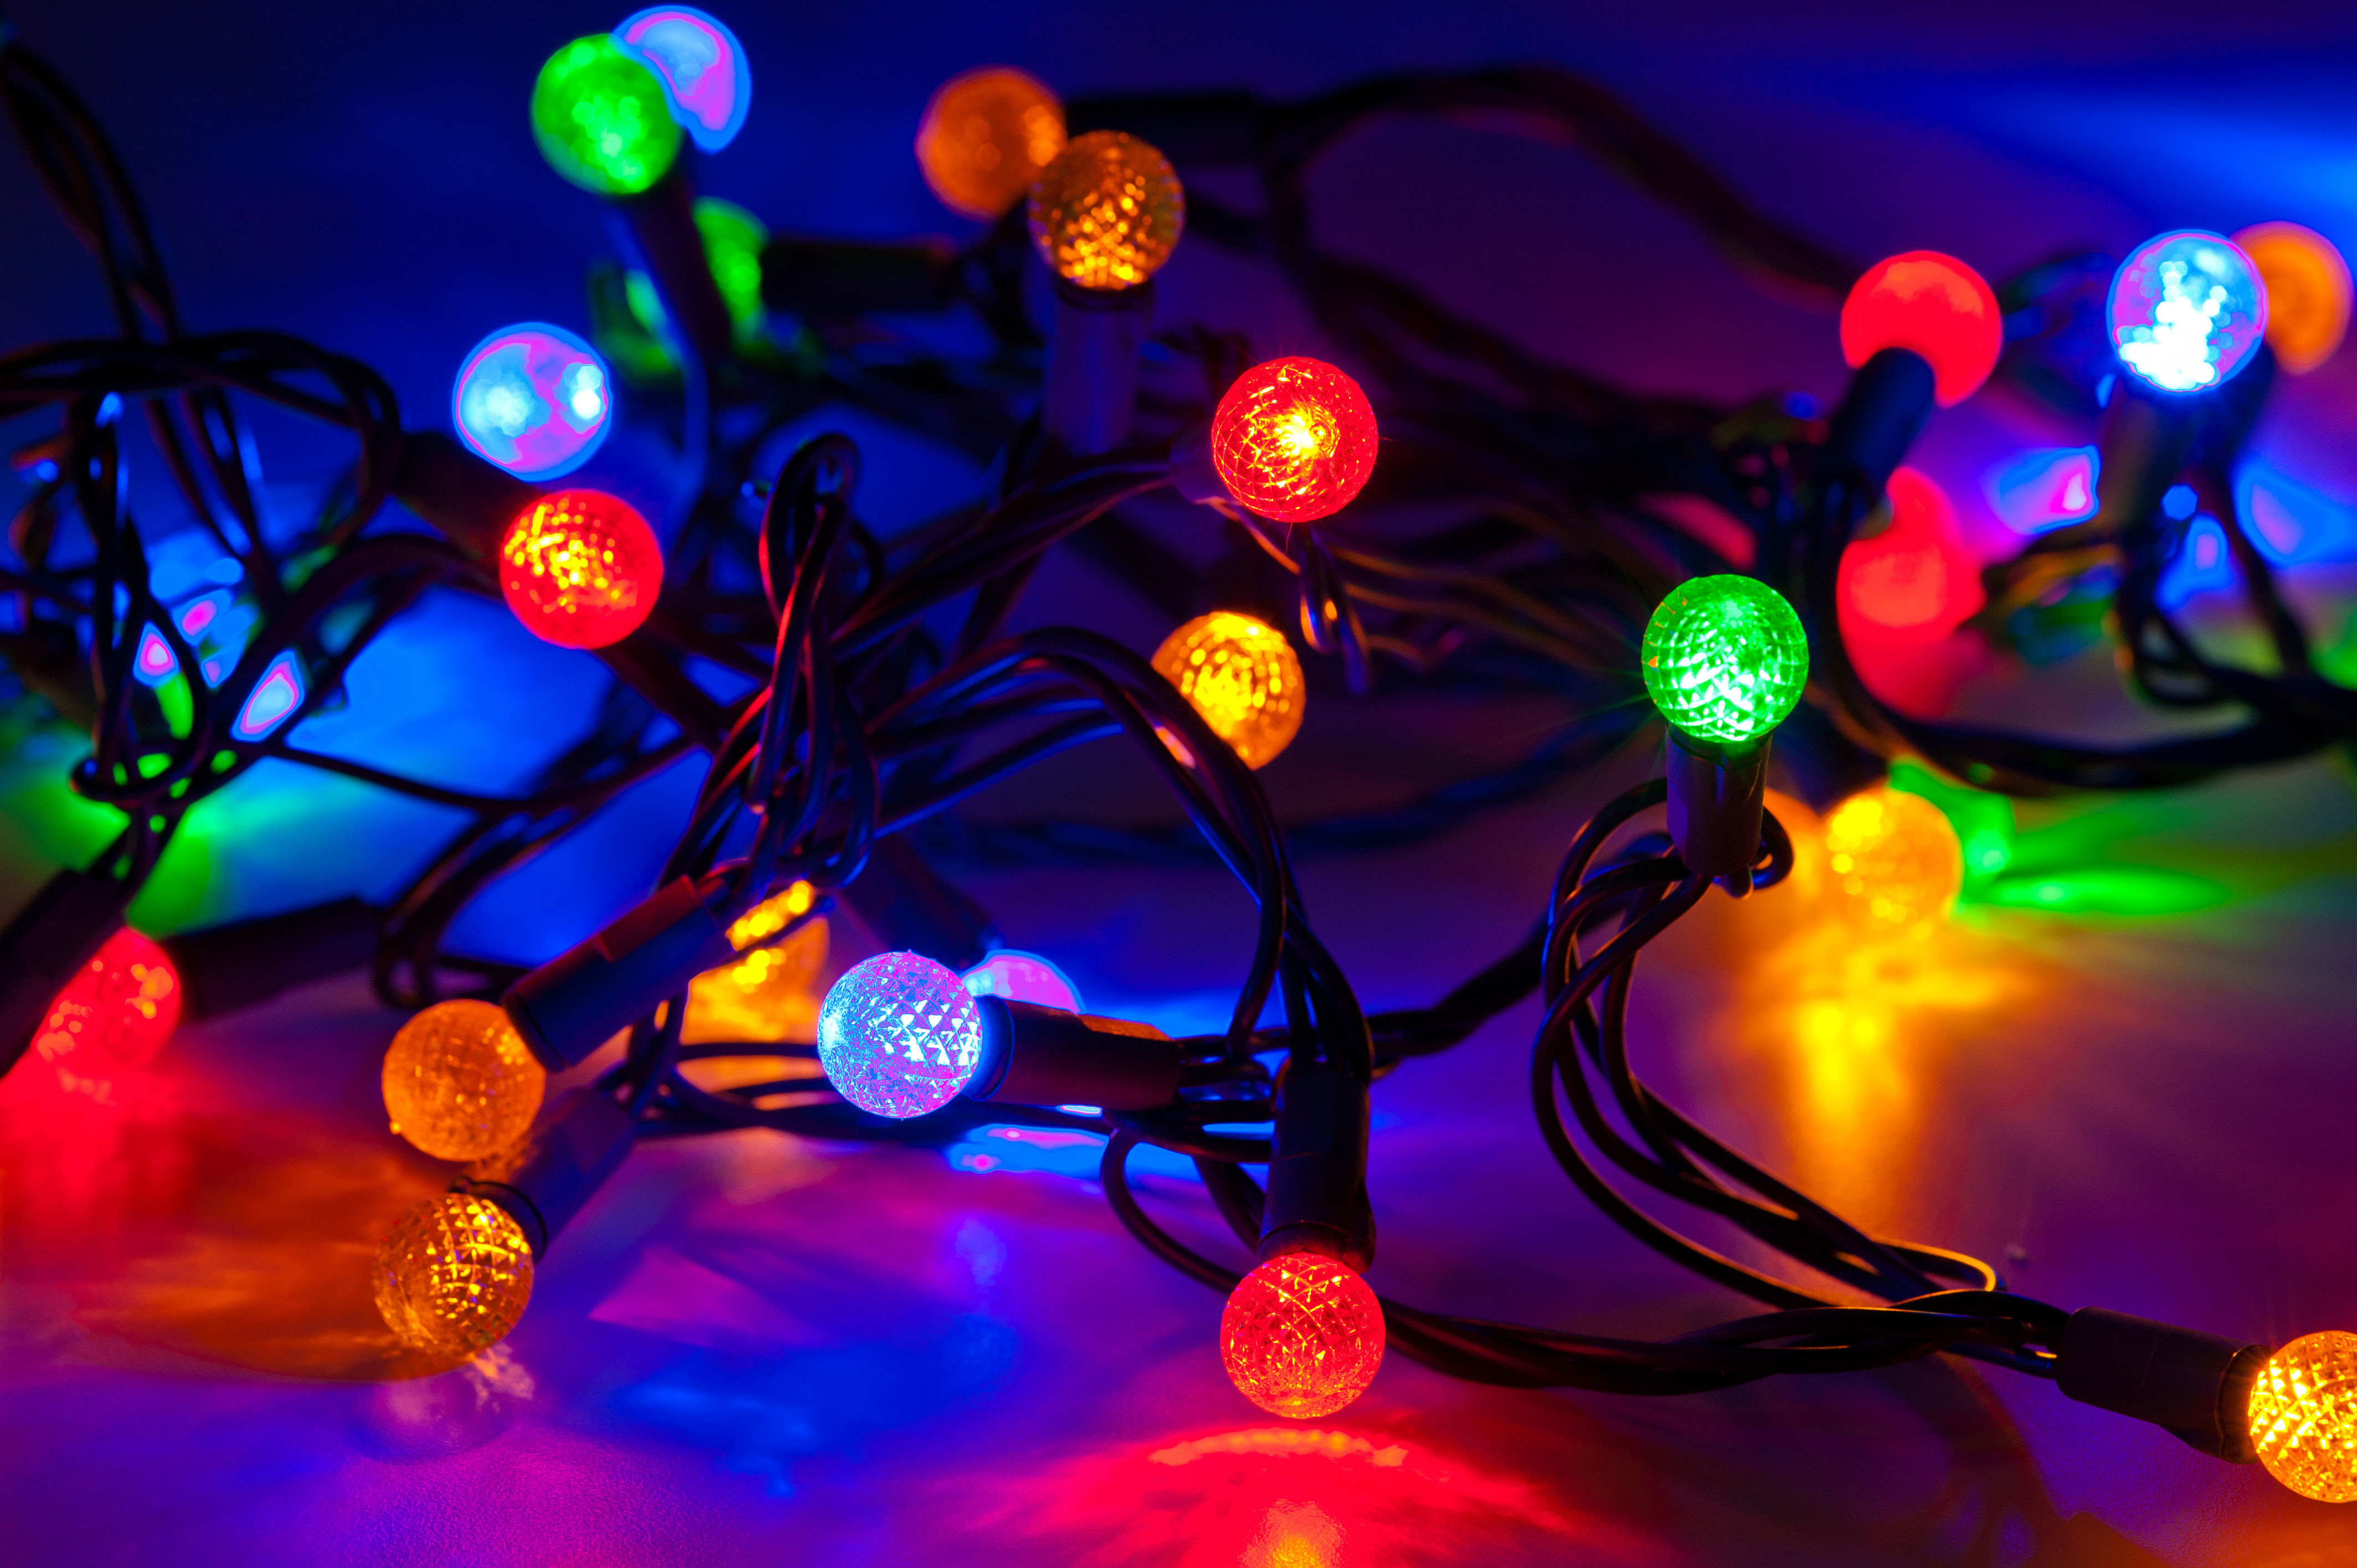 4K Ultra HD Christmas Lights Wallpaper and Background Image